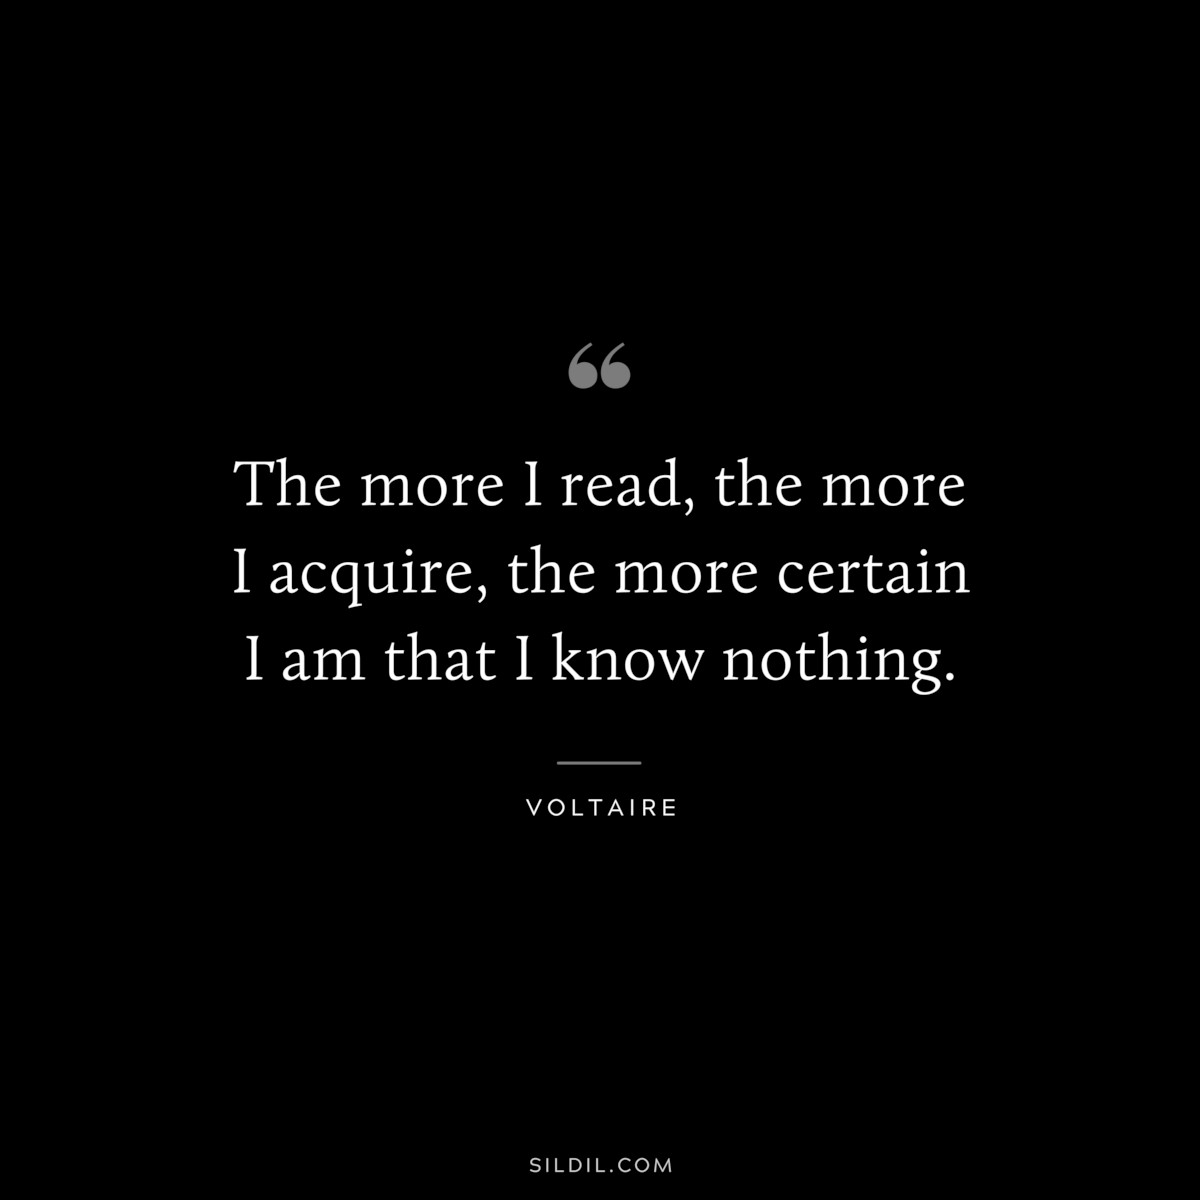 The more I read, the more I acquire, the more certain I am that I know nothing. ― Voltaire